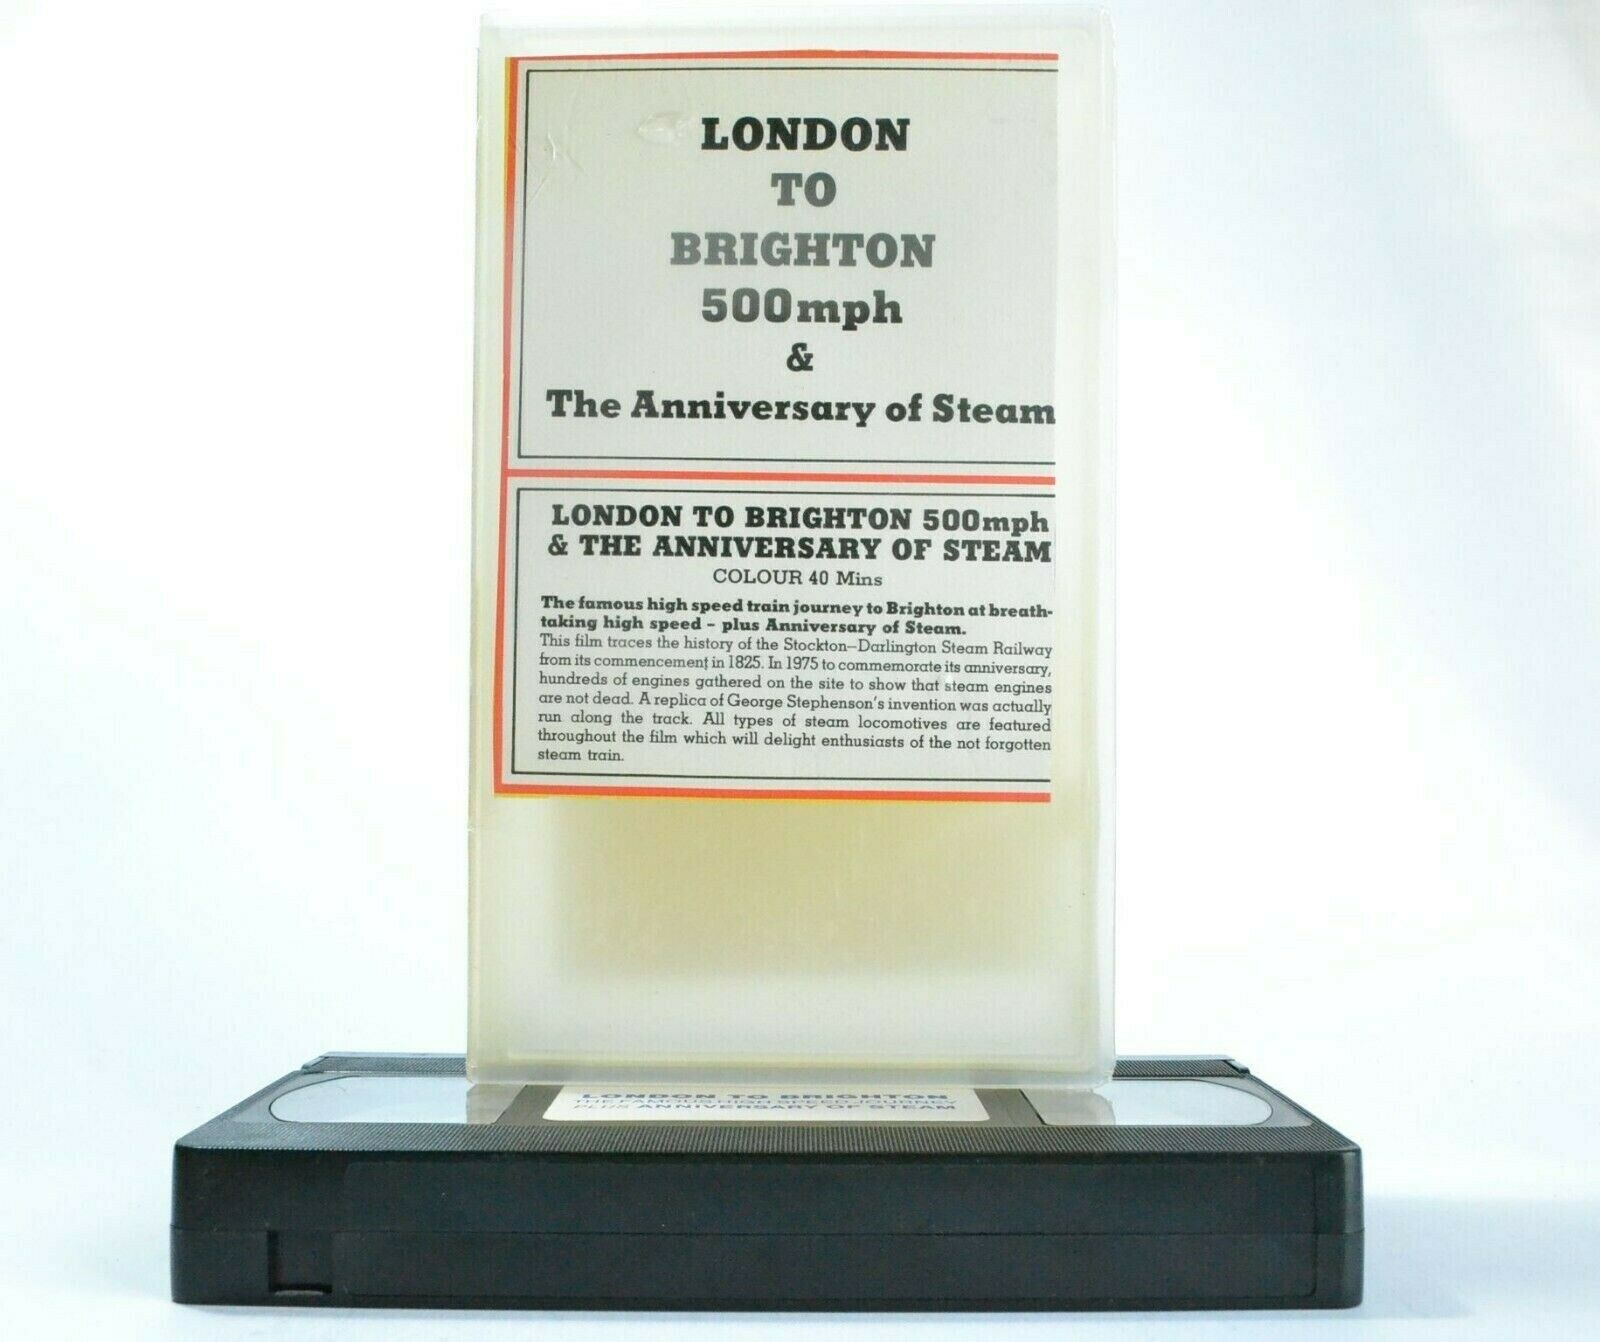 London To Brighton 500mph/The Anniversary Of Steam - Train Journey - Pal VHS-